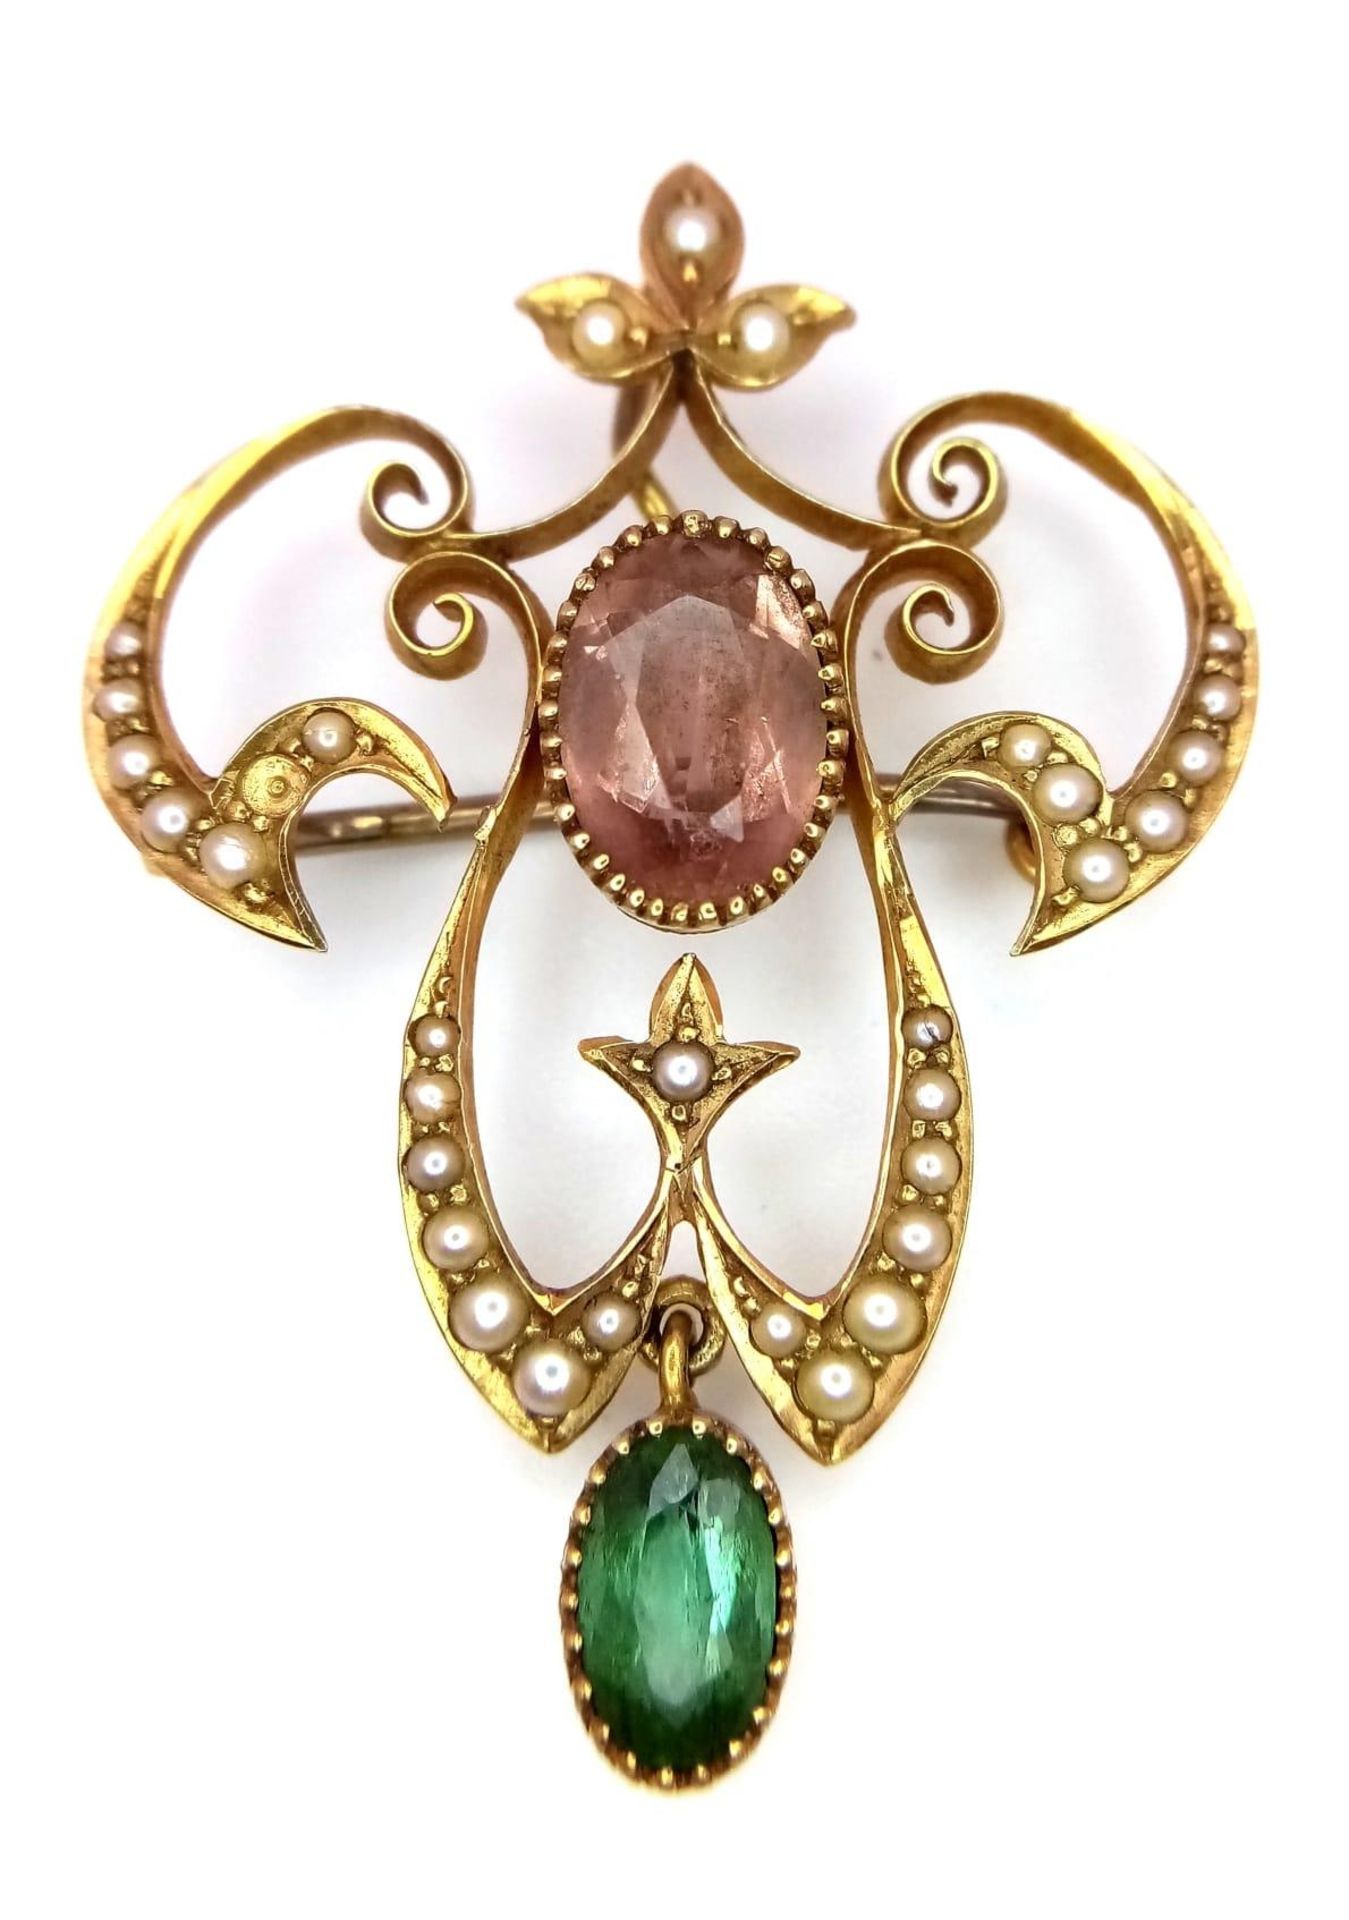 Two Victorian 10 K yellow gold brooches with seed pearls and a variety of stones. Lengths: 39 mm and - Image 2 of 5